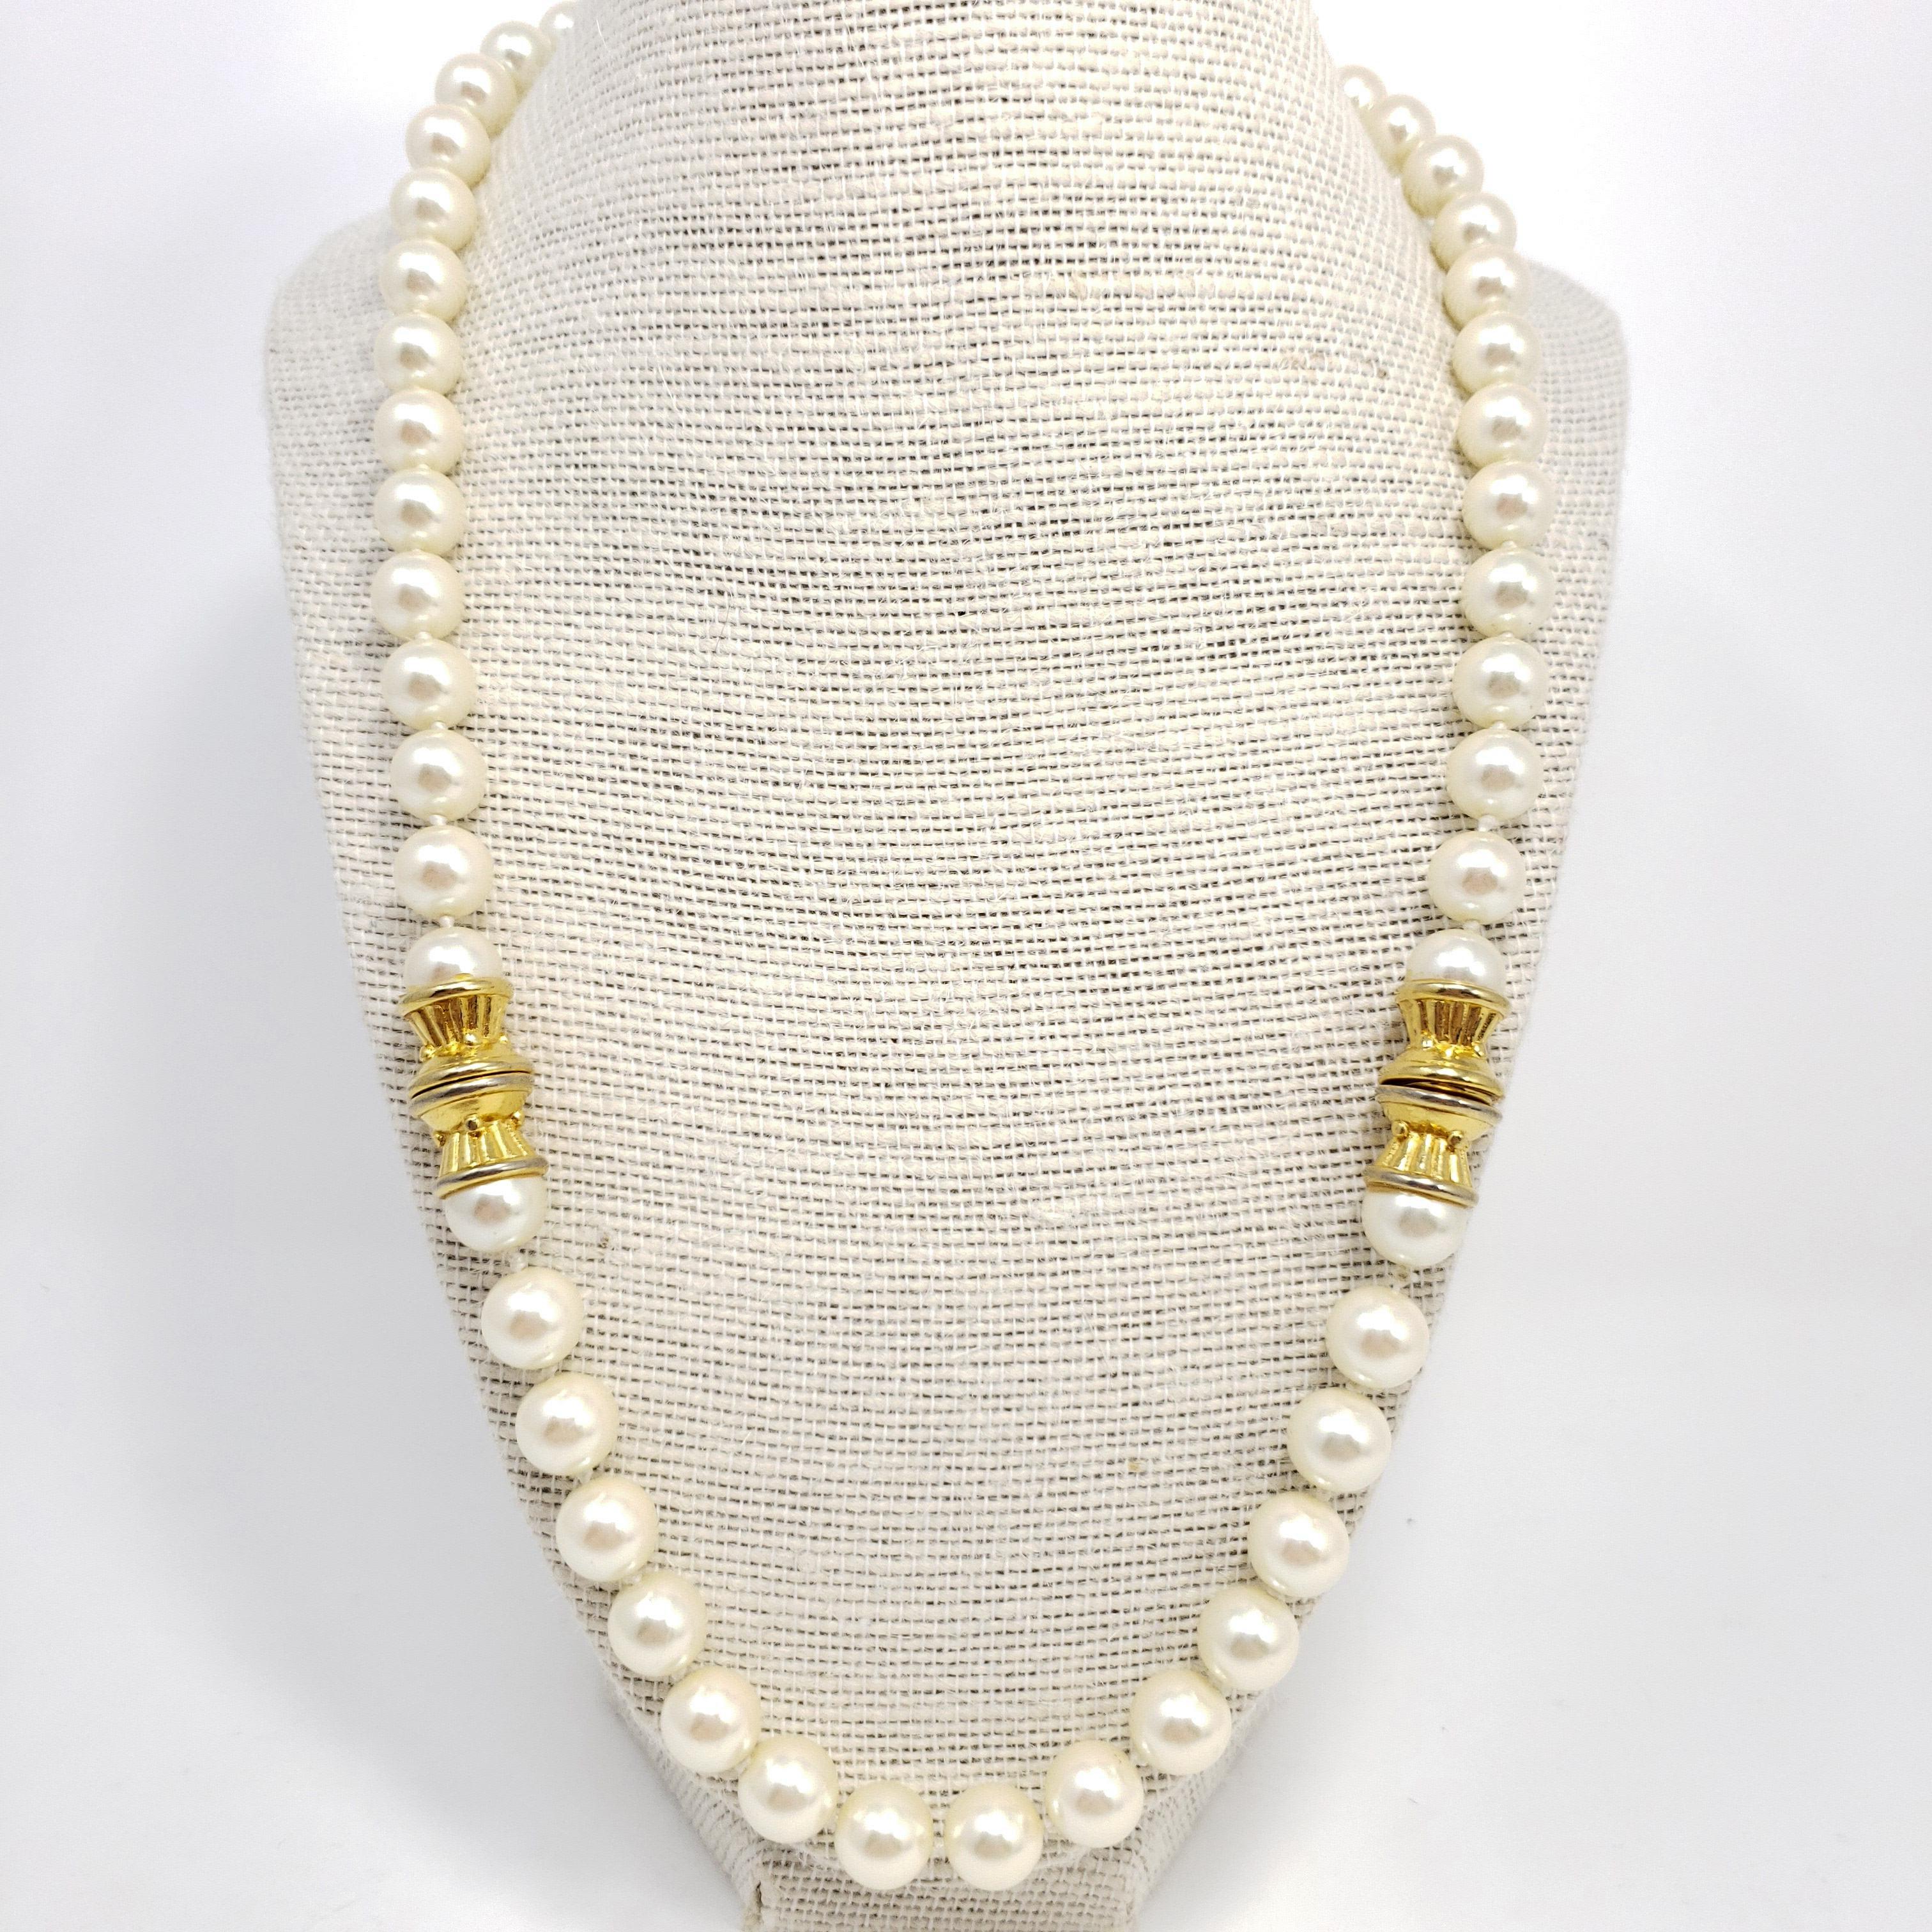 Vintage pearl necklace, featuring a single, 22 inch strand of white faux pearls decorated with two gold-tone accents. An exquisite accessory!
